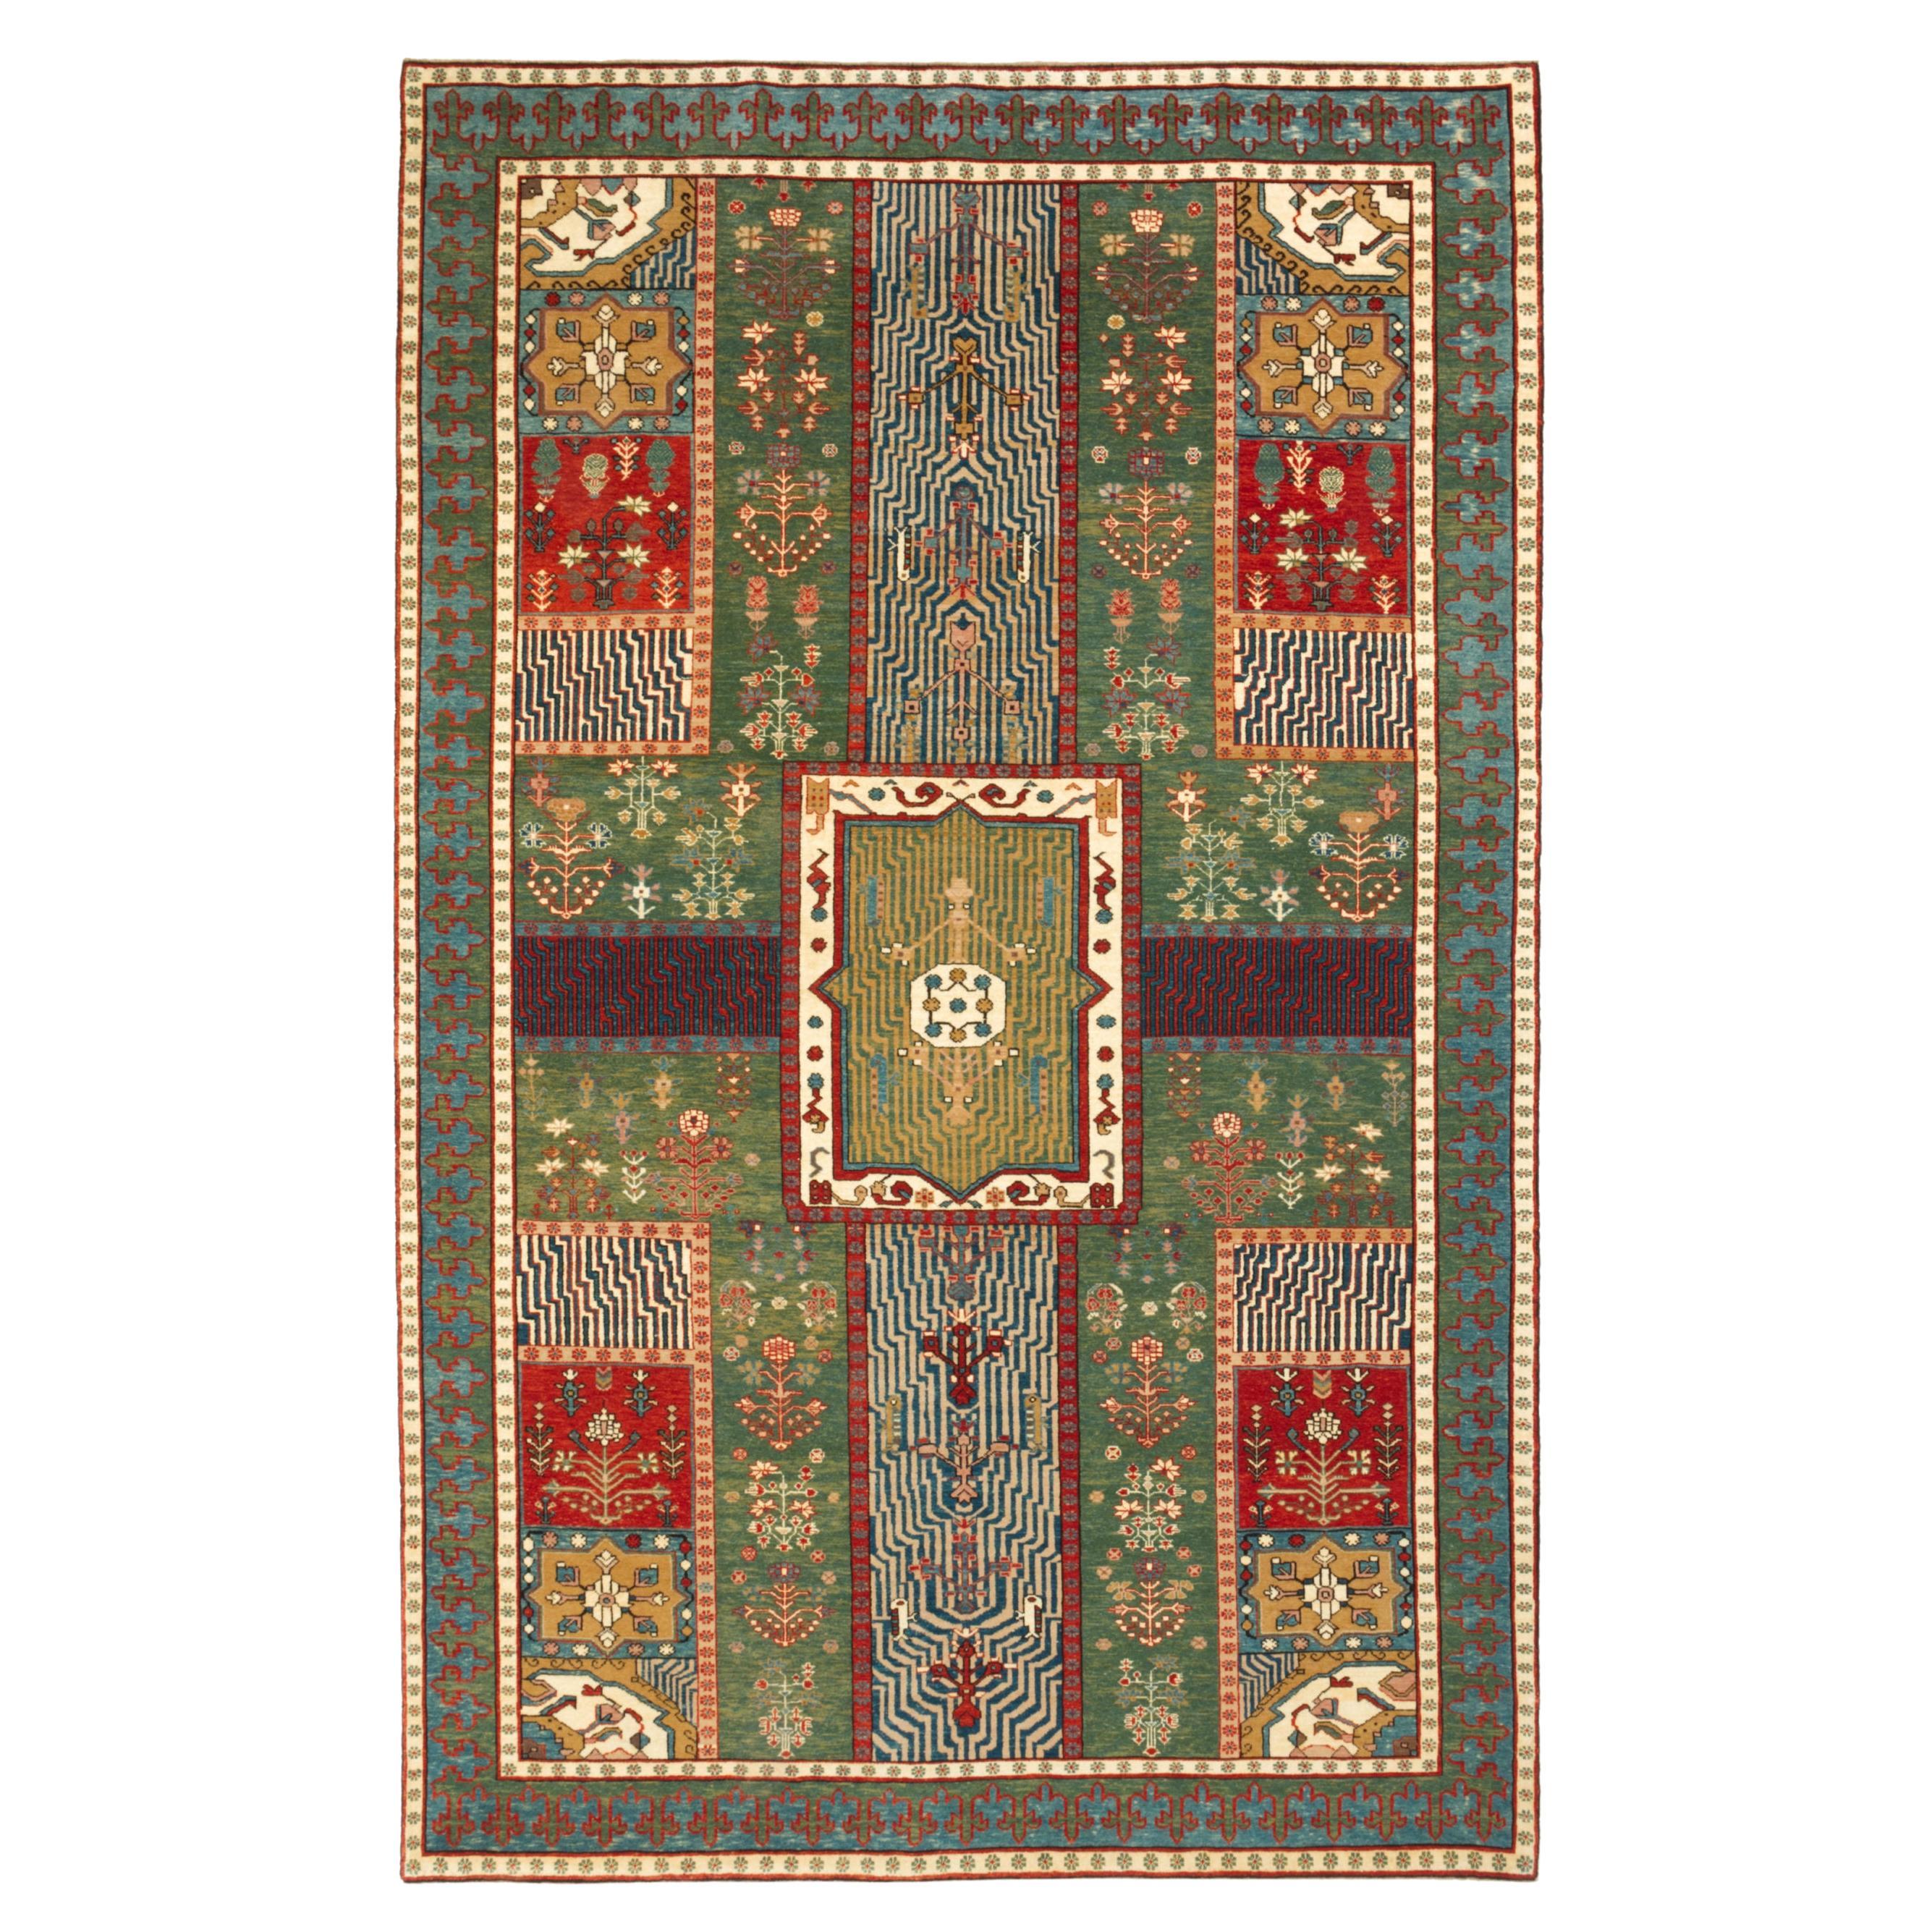 Ararat Rugs Garden Rug, 18th Century Persian Revival Carpet, Natural Dyed For Sale